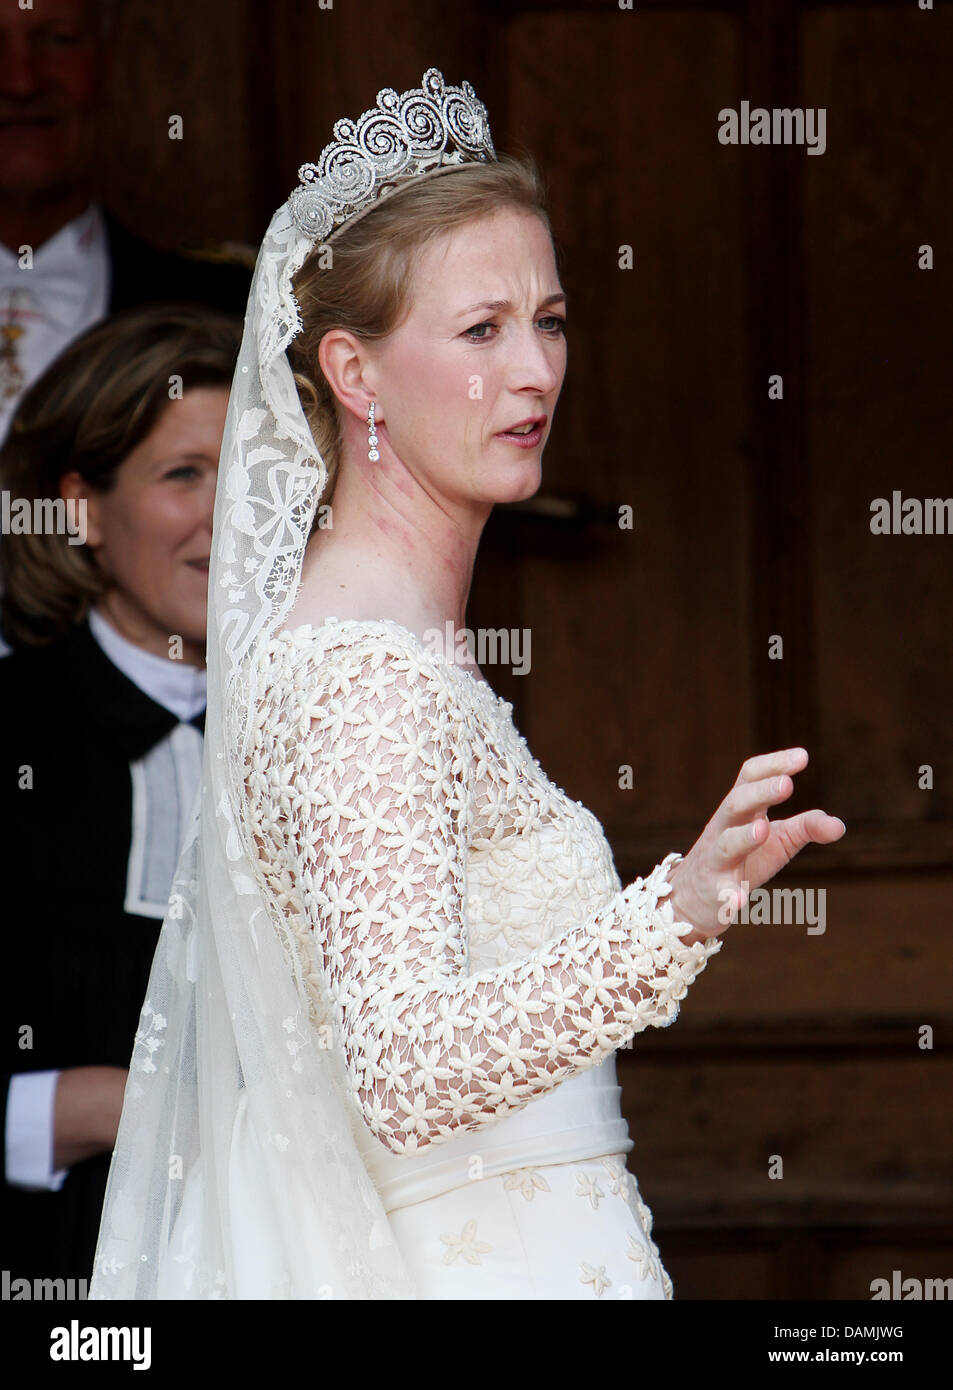 Princess Nathalie of Sayn-Wittgenstein-Berleburg arrives for her religious wedding with Alexander Johannsmann at the Evangelical Church of the castle in Bad Berleburg, Germany, 18 June 2011. The couple had a civil marriage on May 27th, 2010. Photo: Patrick van Katwijk Stock Photo